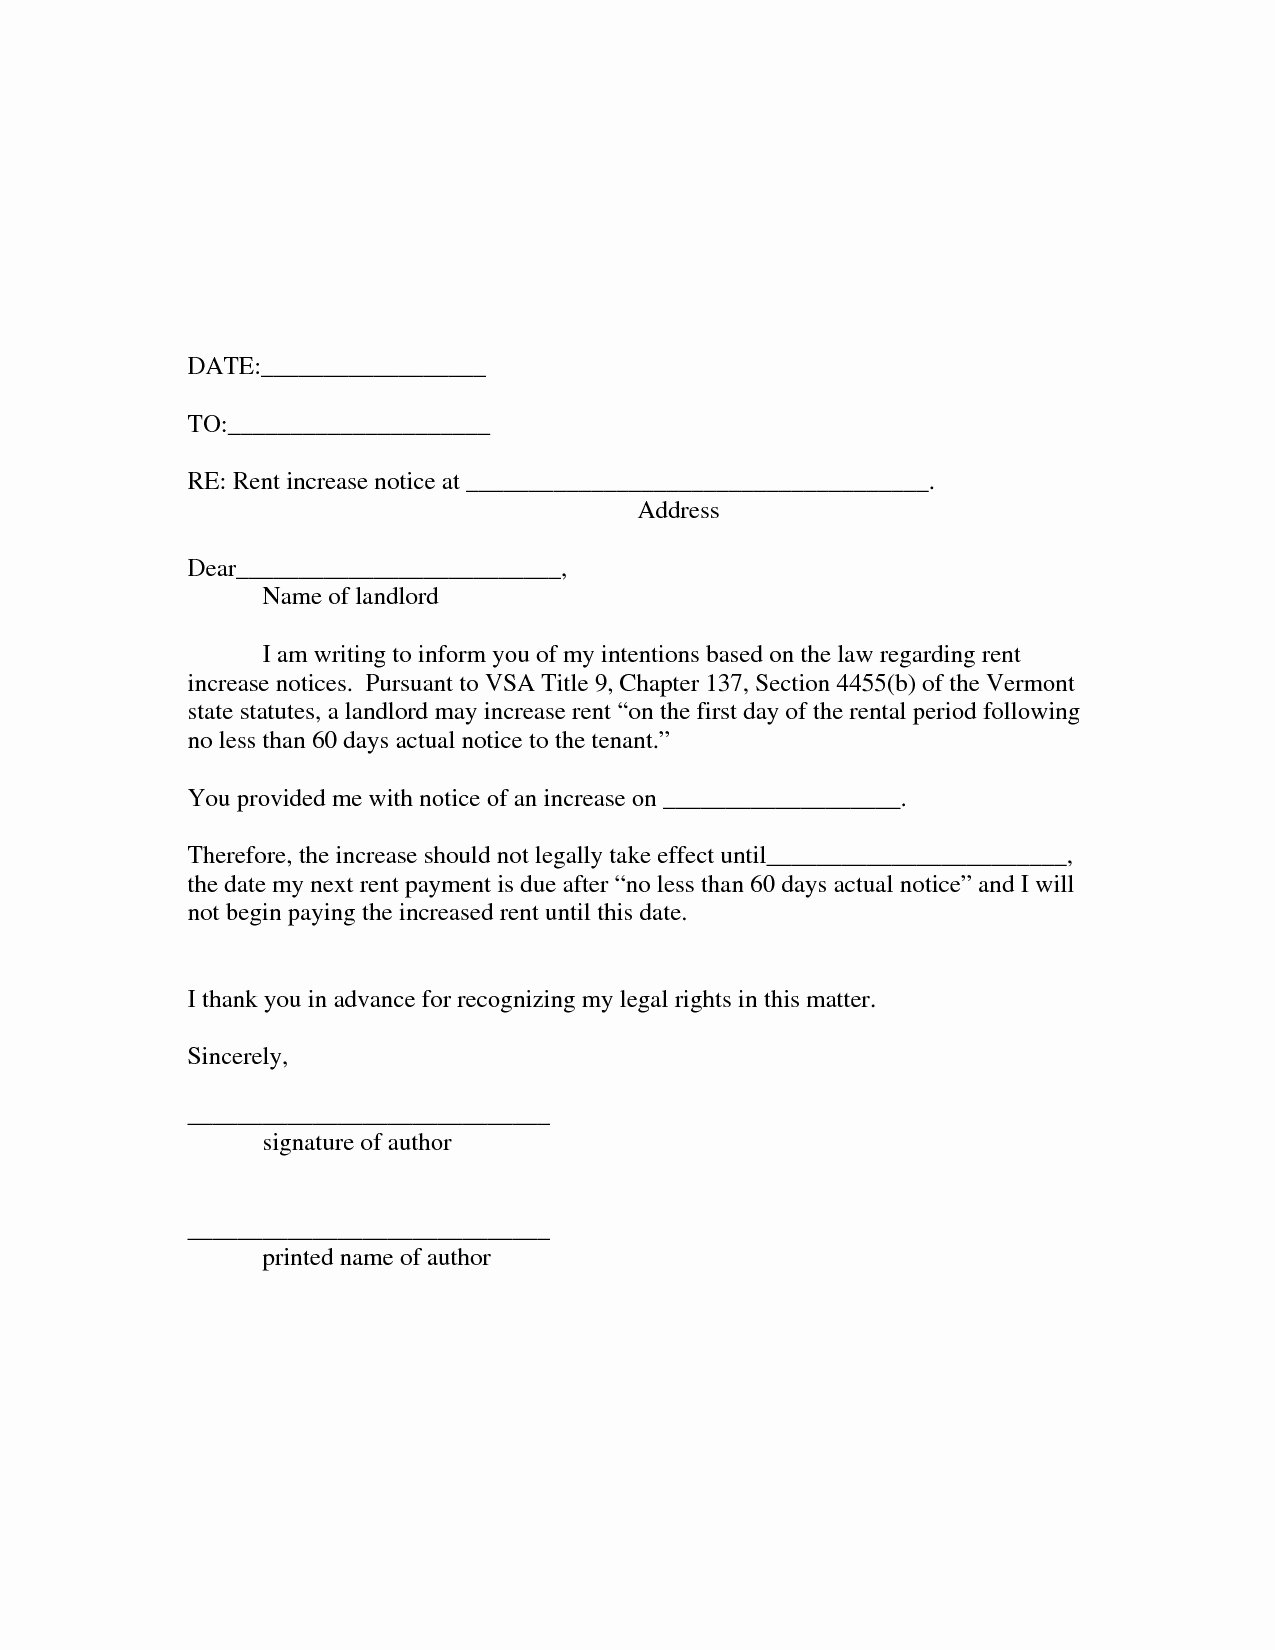 Sample Landlord Letters to Tenants Best Of New Letter From Landlord to Tenant Rent Increase